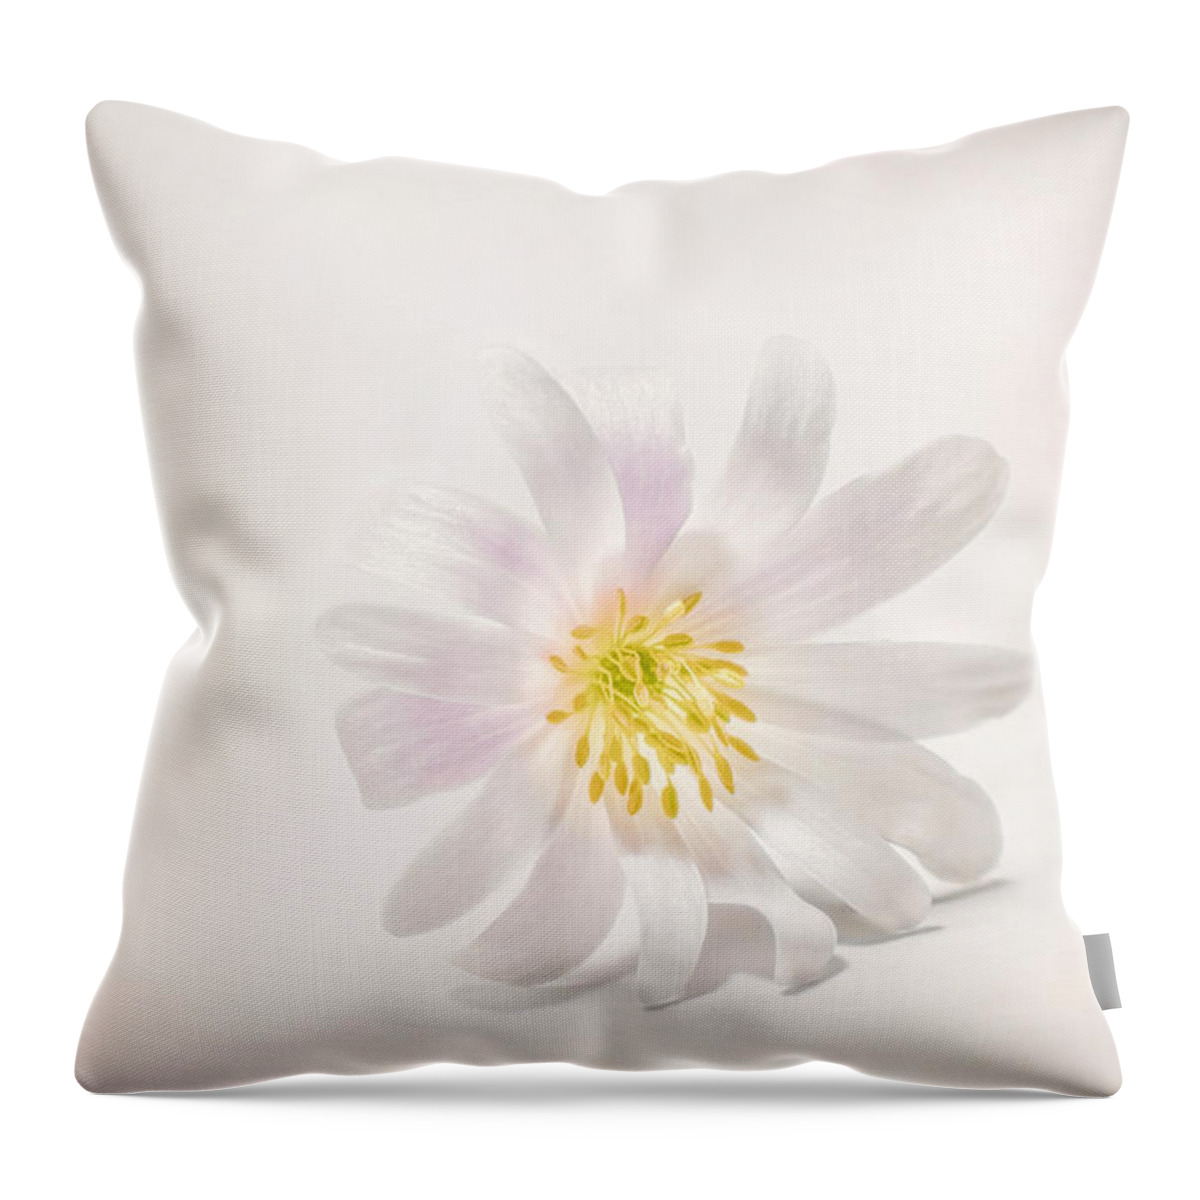 Blossom Throw Pillow featuring the photograph Spring Blossom by Scott Norris